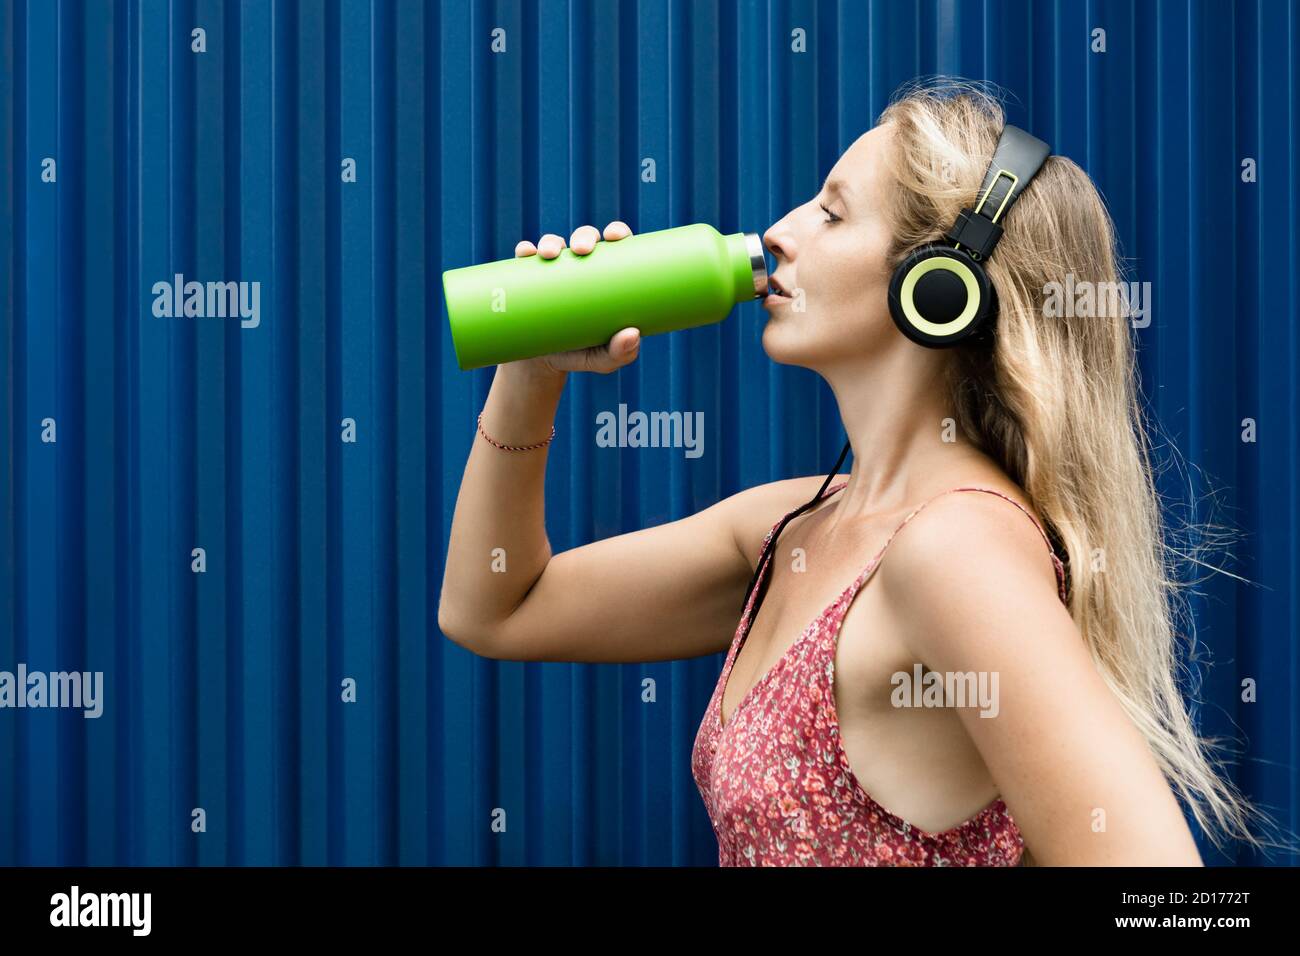 Young blond woman on blue background drink fresh spring water from green reusable bottle. Healthy lifestyle in summer city. Stock Photo